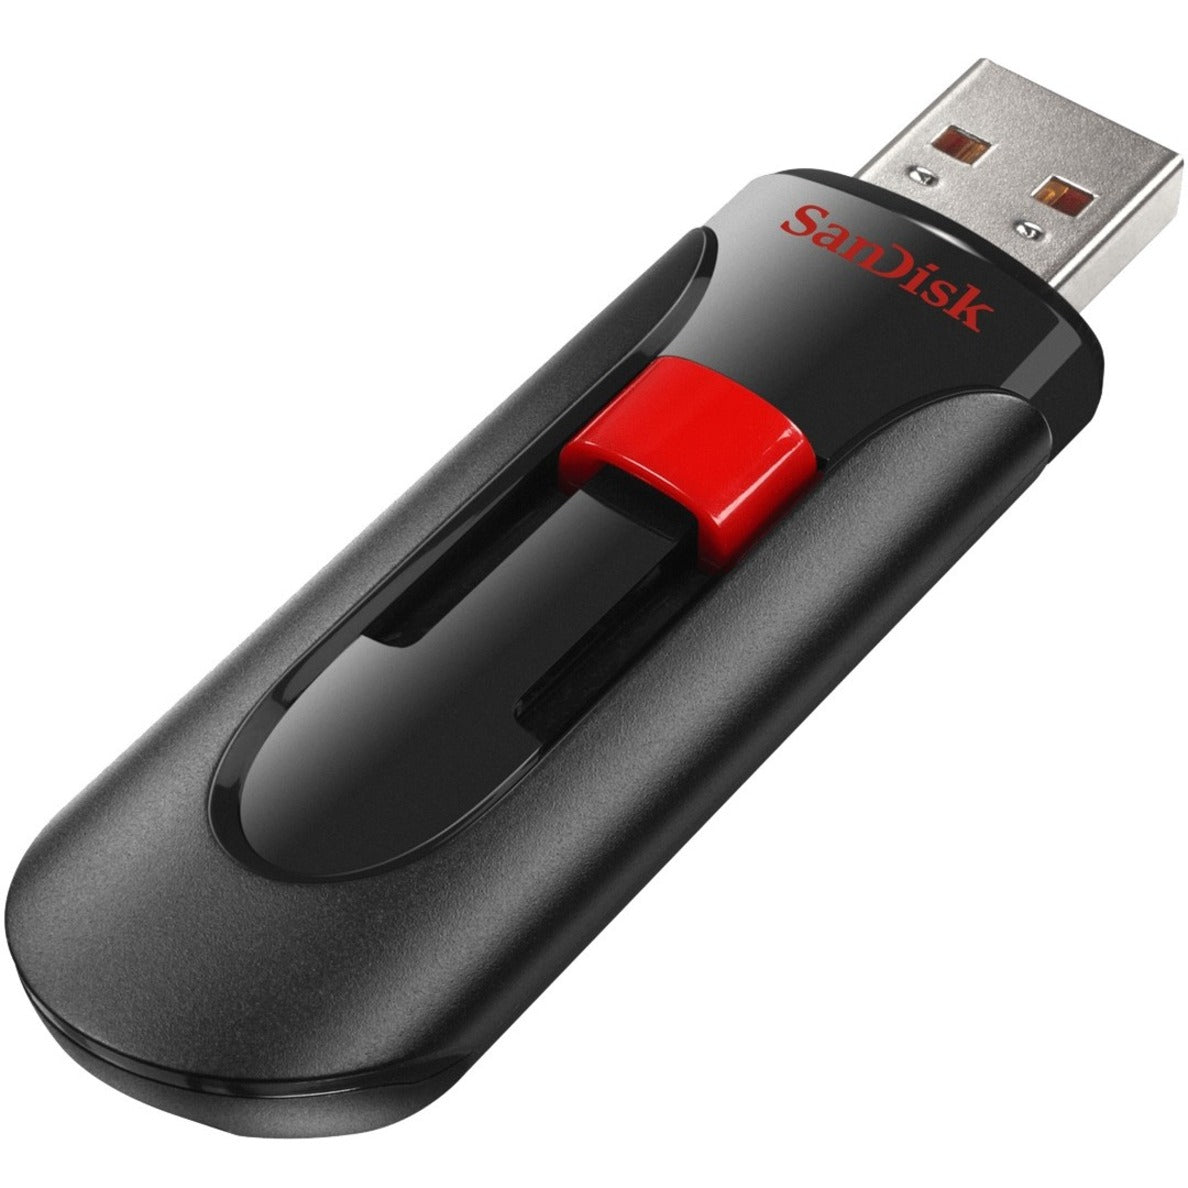 SanDisk SDCZ60-128G-A46 Cruzer Glide USB Flash Drive 128GB, Retractable Design, USB 2.0 Type A Interface